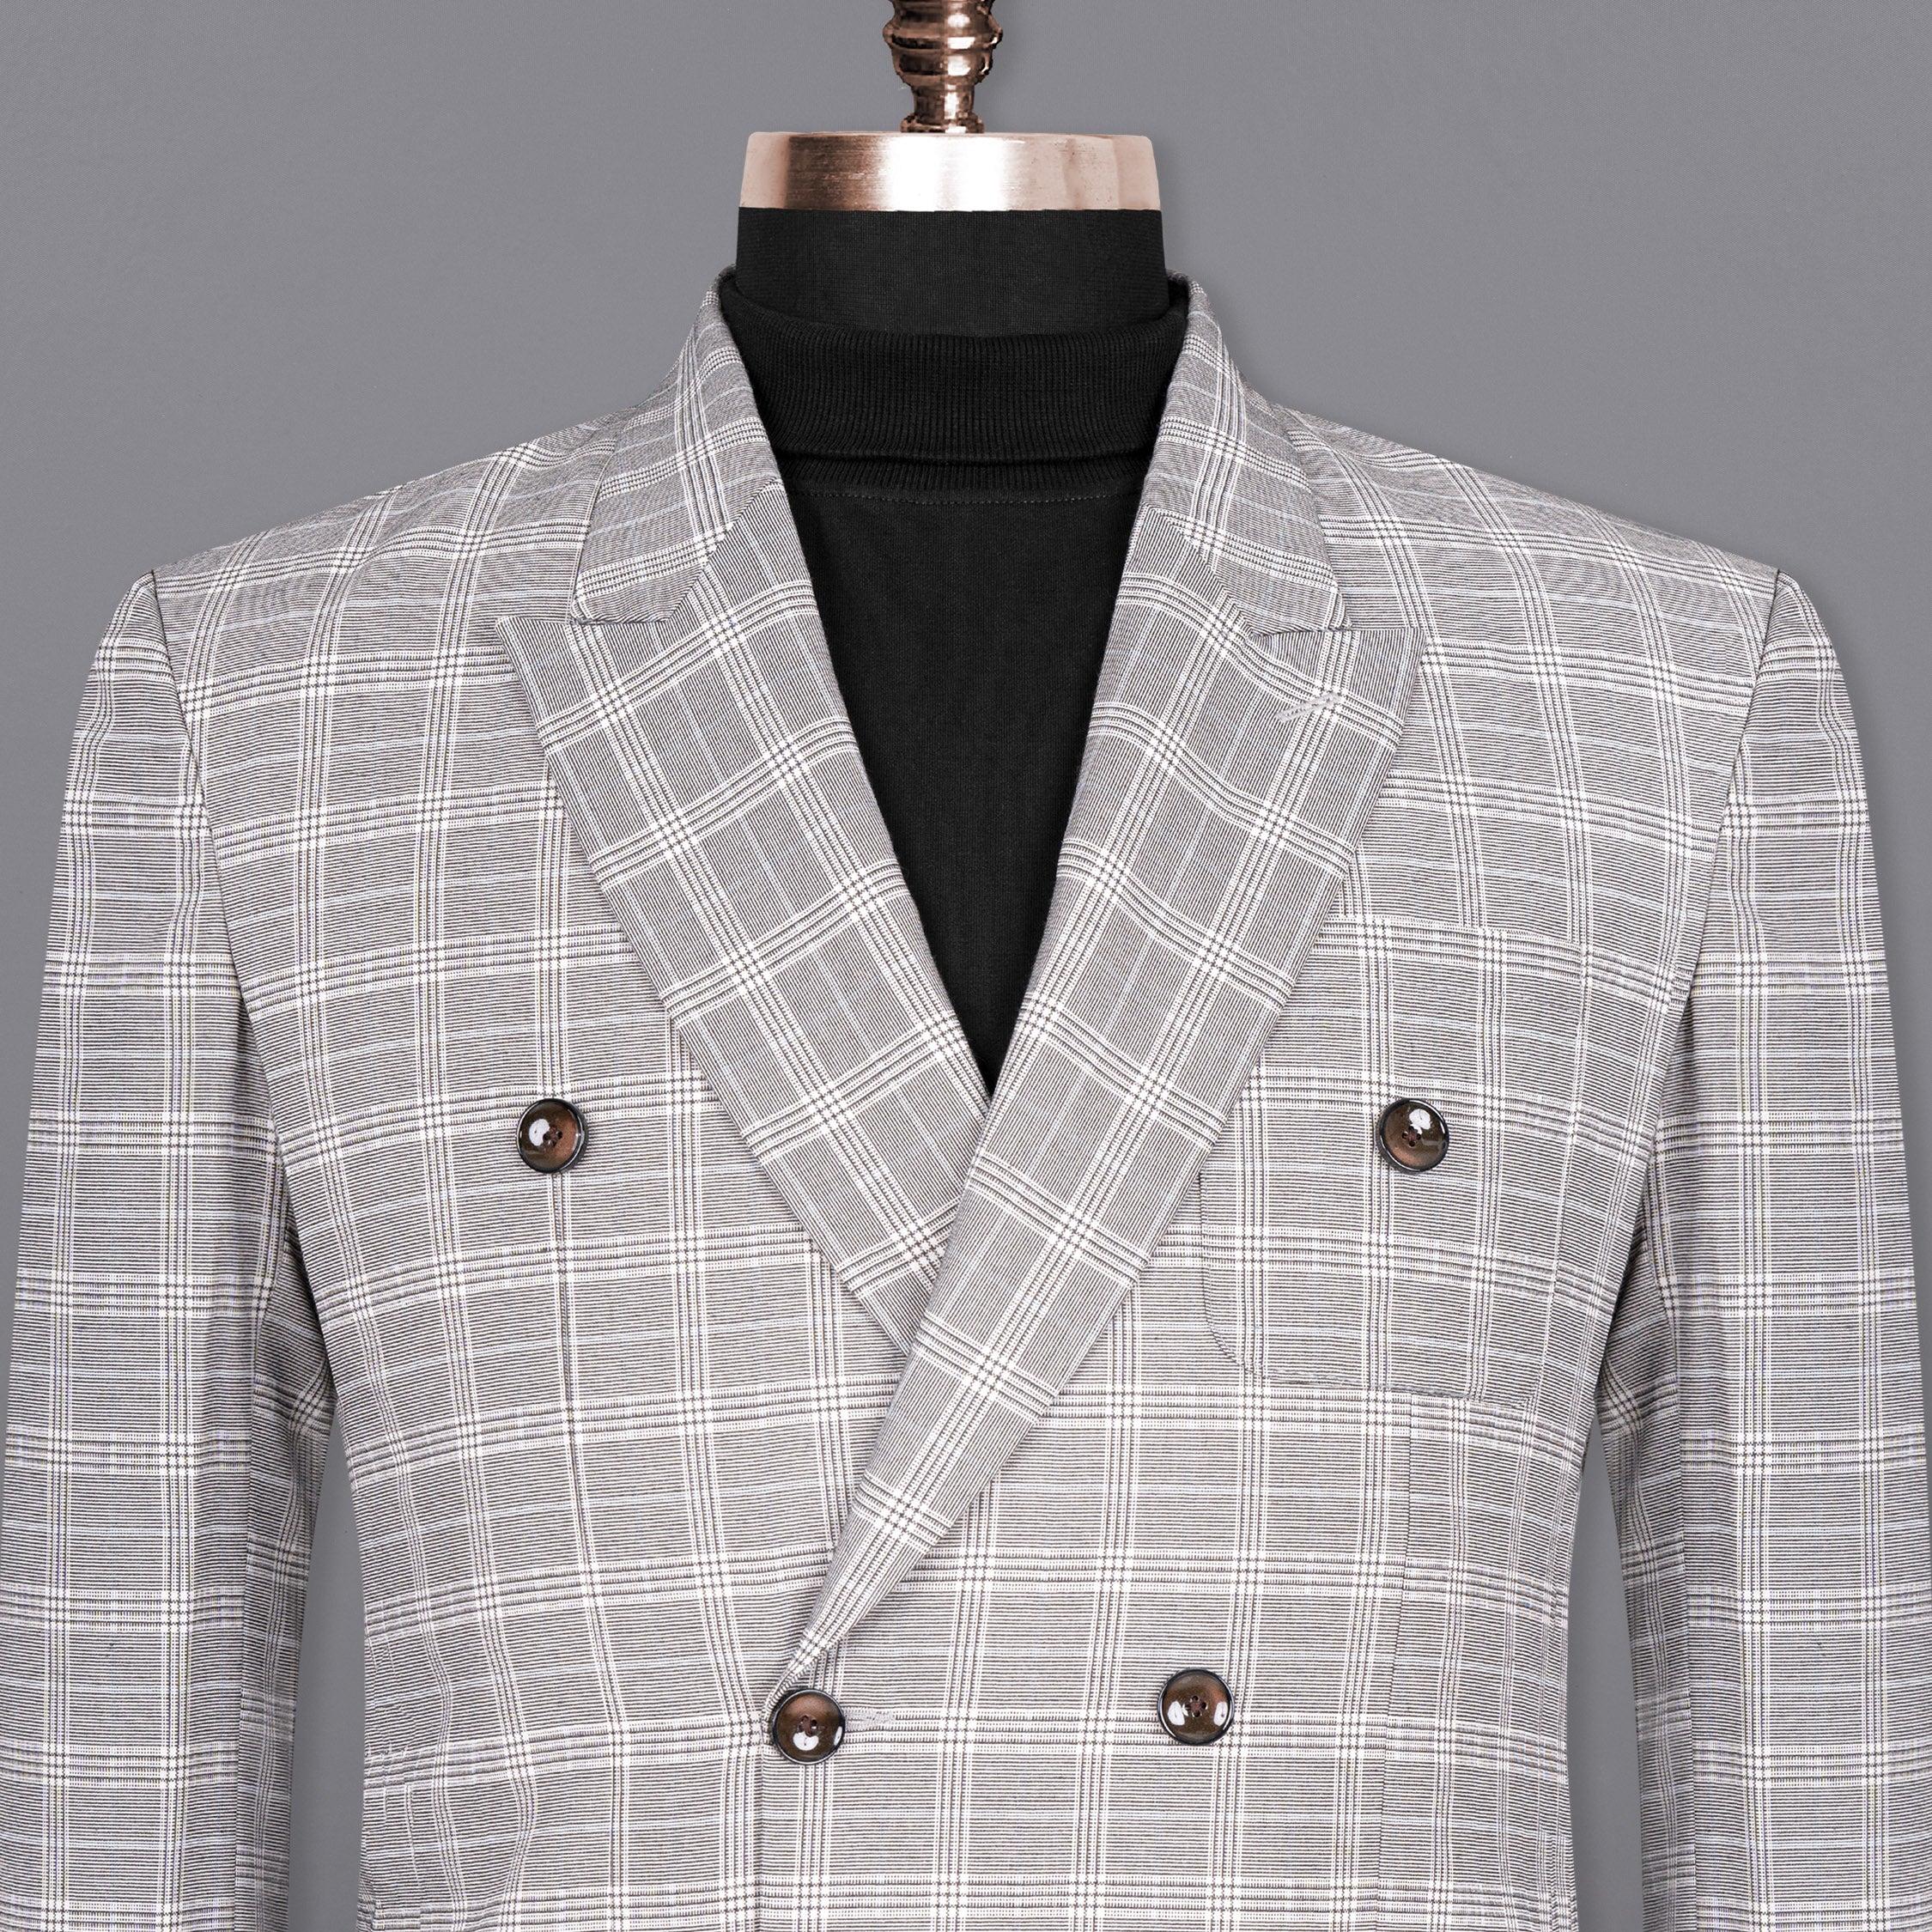 Mercury Grey Plaid Woolrich Double-Breasted Blazer BL1478-D22-36,BL1478-DB-PP-38,BL1478-DB-PP-40,BL1478-DB-PP-42,BL1478-DB-PP-44,BL1478-DB-PP-46,BL1478-DB-PP-48,BL1478-DB-PP-50,BL1478-DB-PP-52,BL1478-DB-PP-54,BL1478-DB-PP-56,BL1478-DB-PP-58,BL1478-DB-PP-60